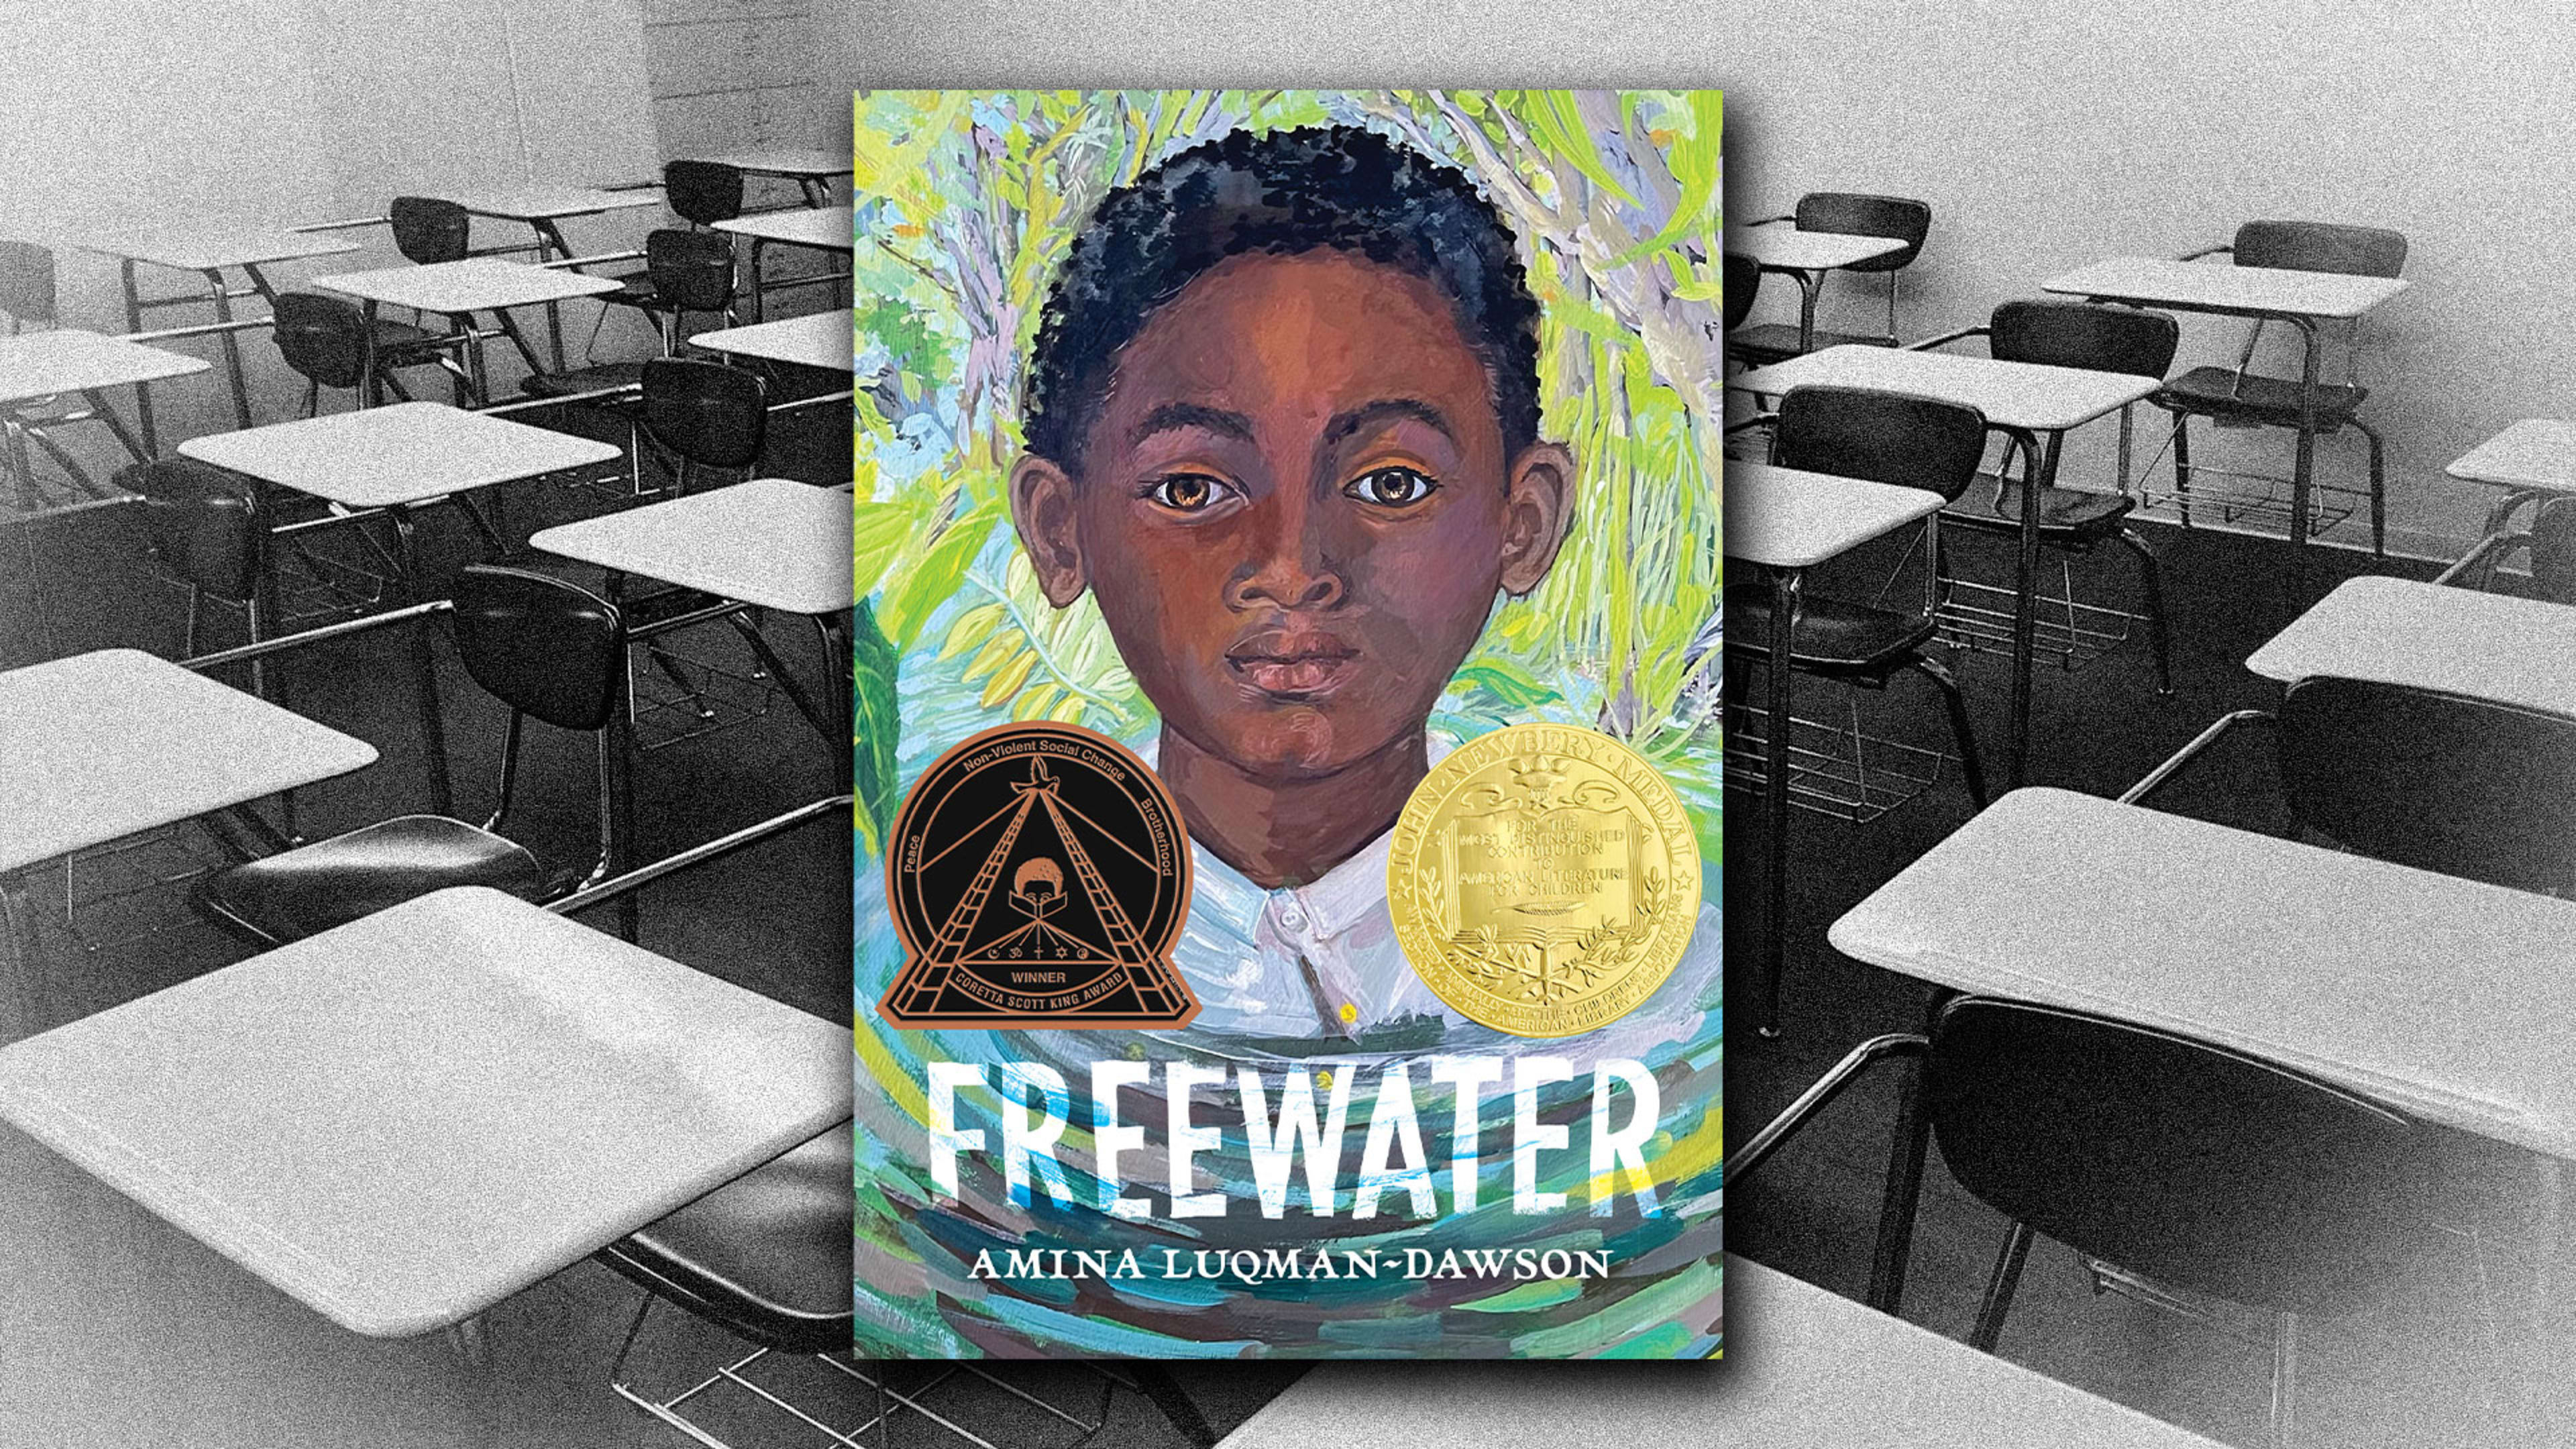 ‘Freewater,’ the book that won the Newbery Medal this week, could quickly be banned in Florida schools